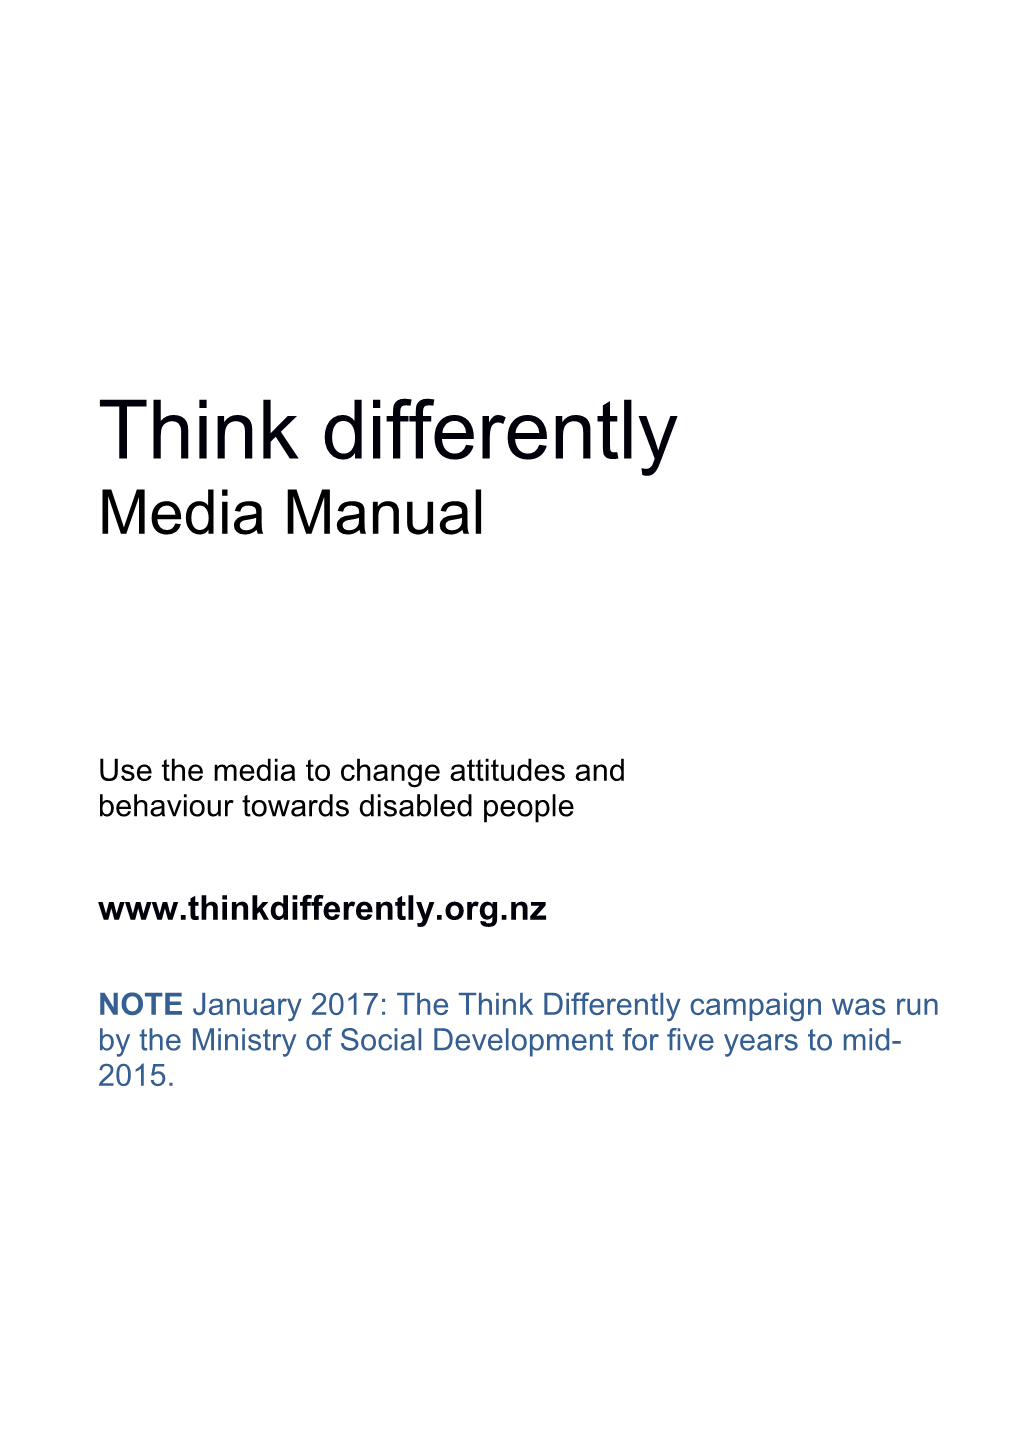 Use the Media to Change Attitudes And